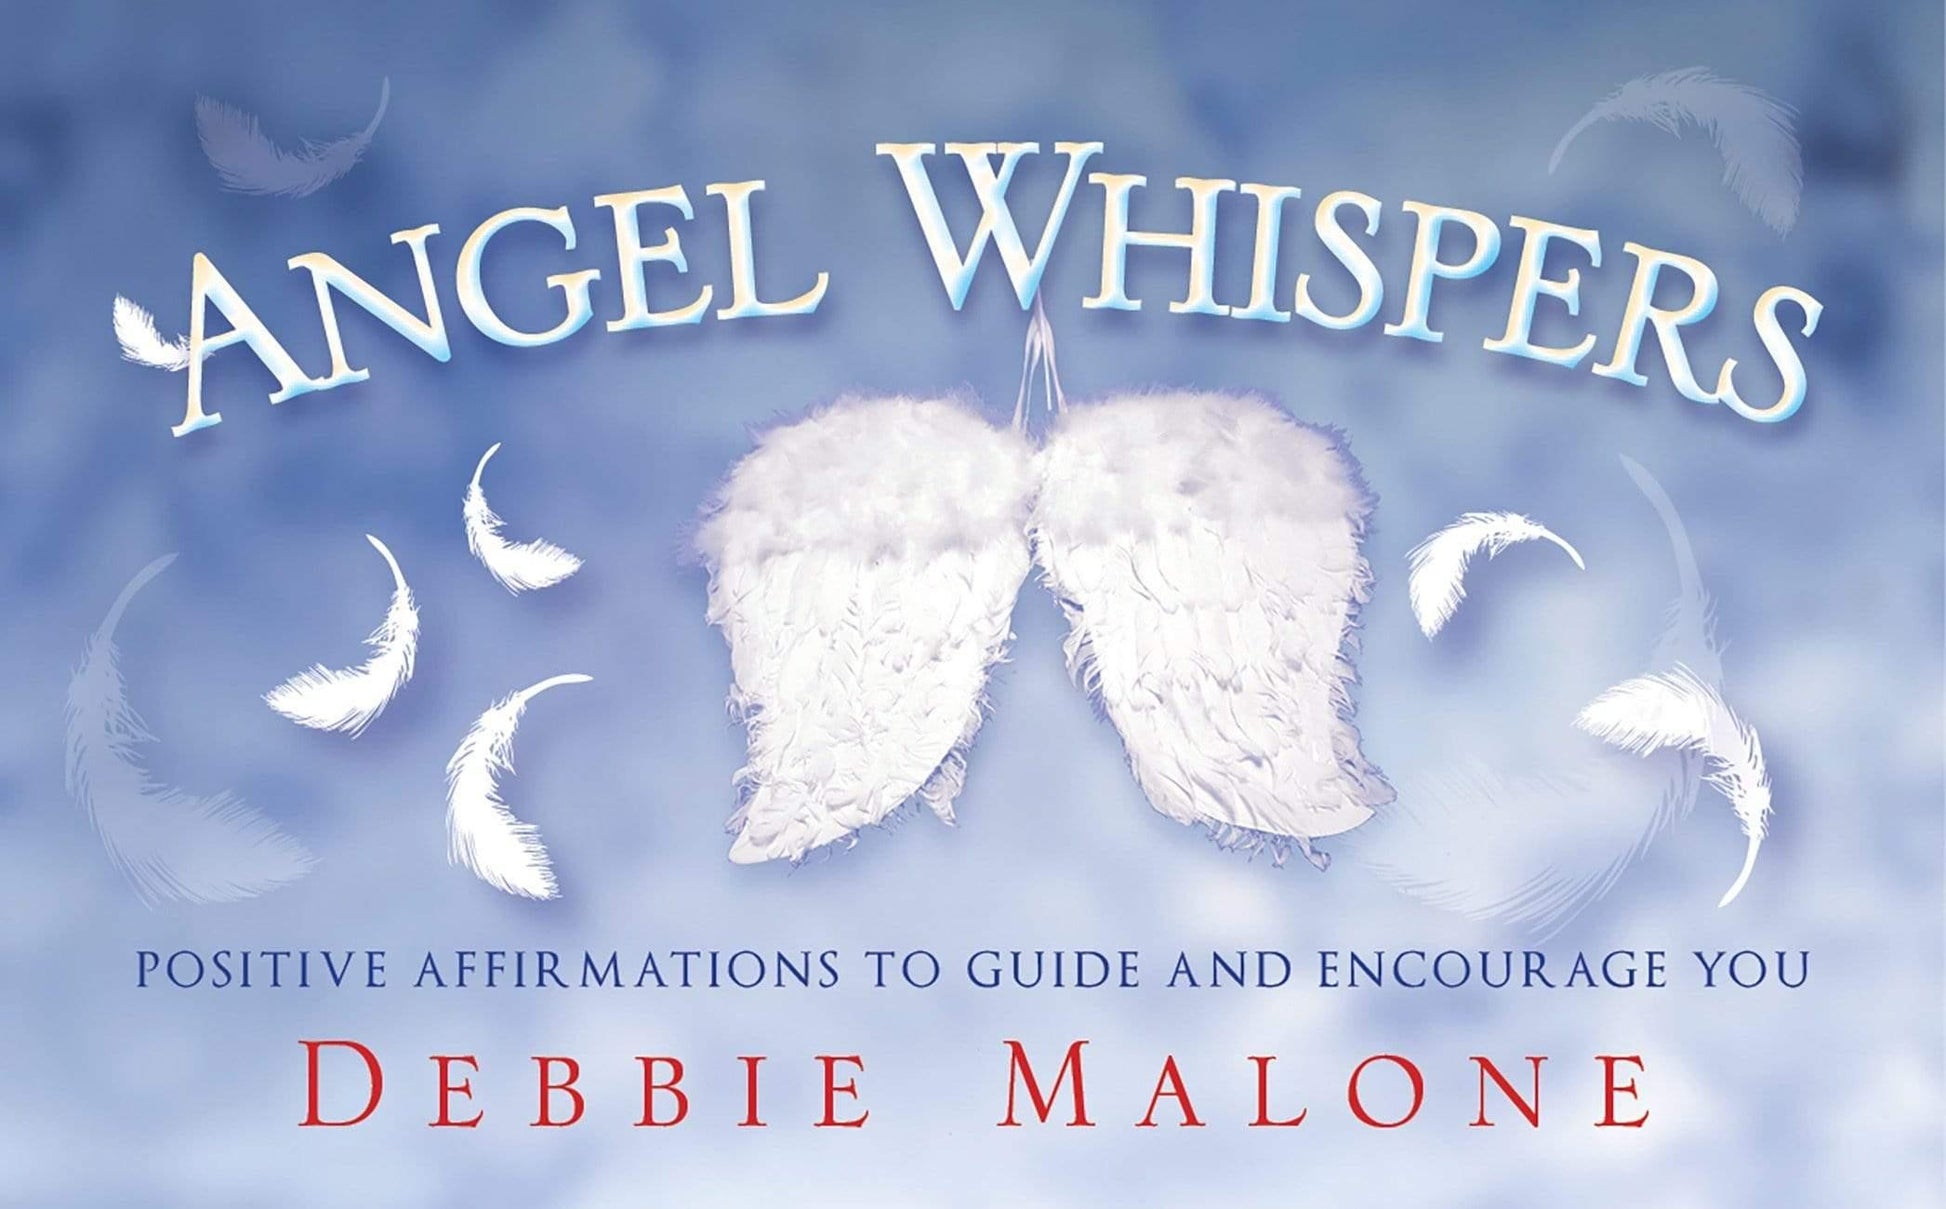 Angel Whispers Affirmation Cards - The Harmony Store